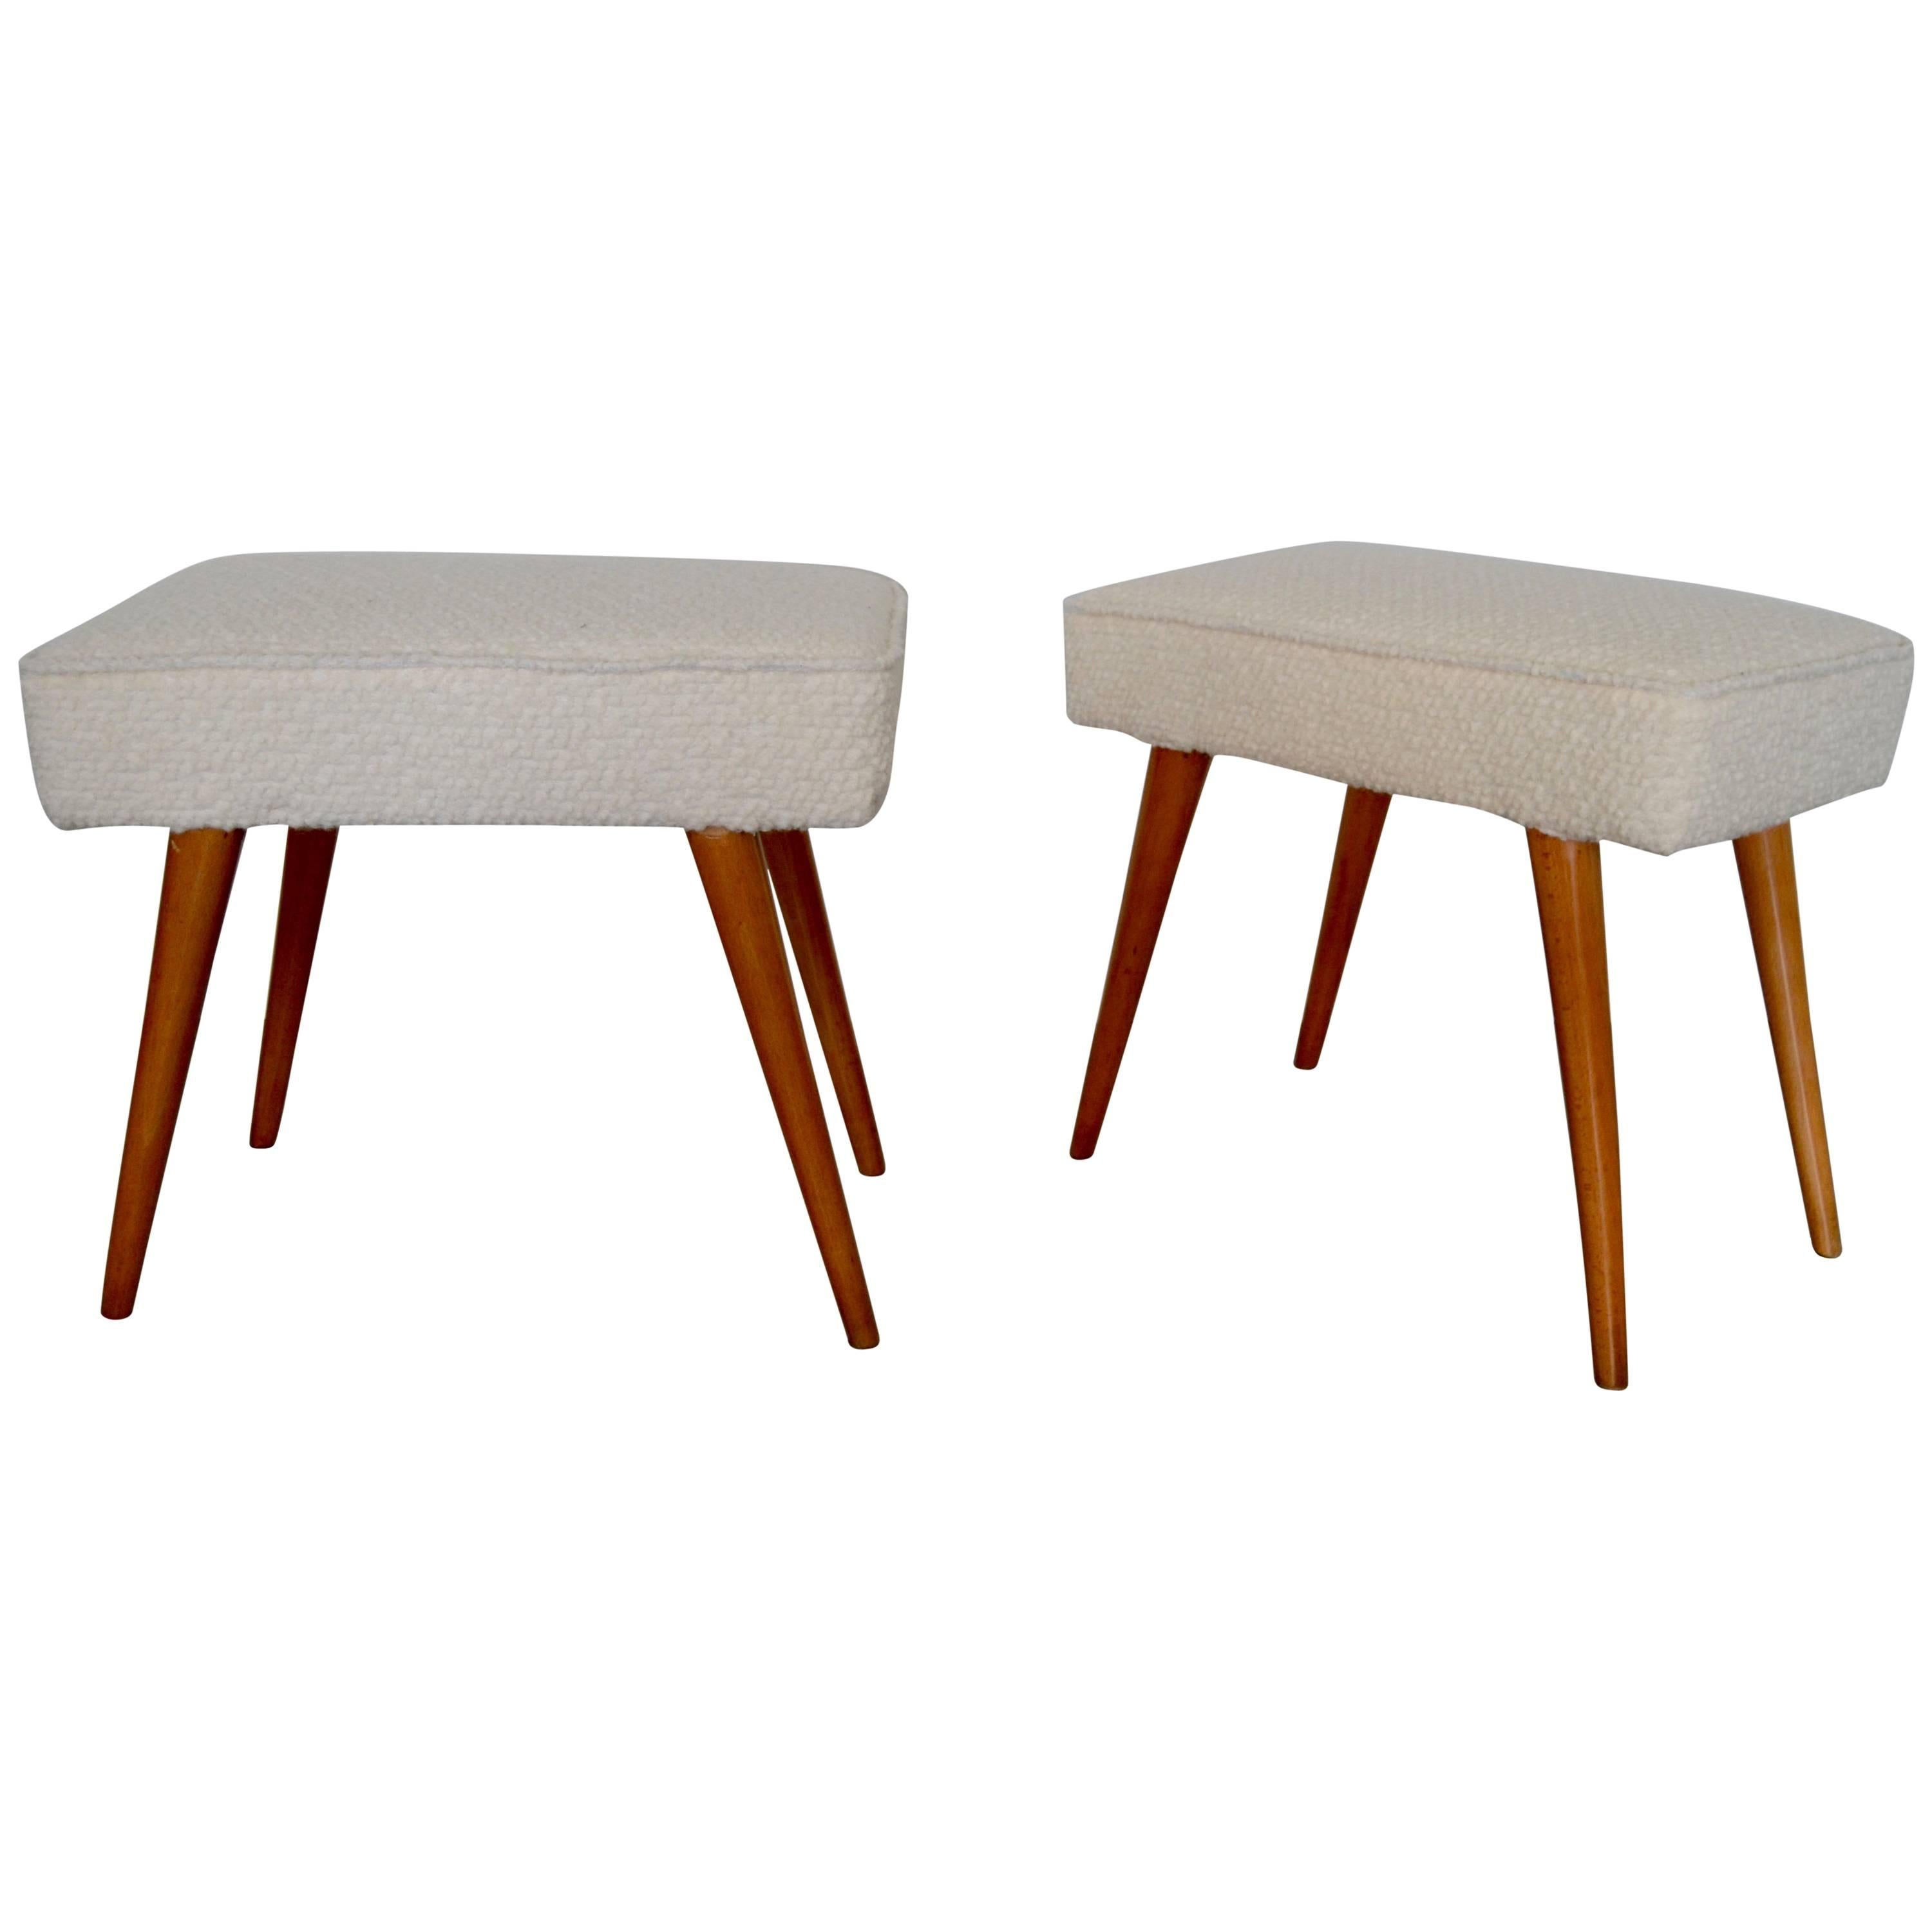 Pair of 1950s, Italian Stools For Sale